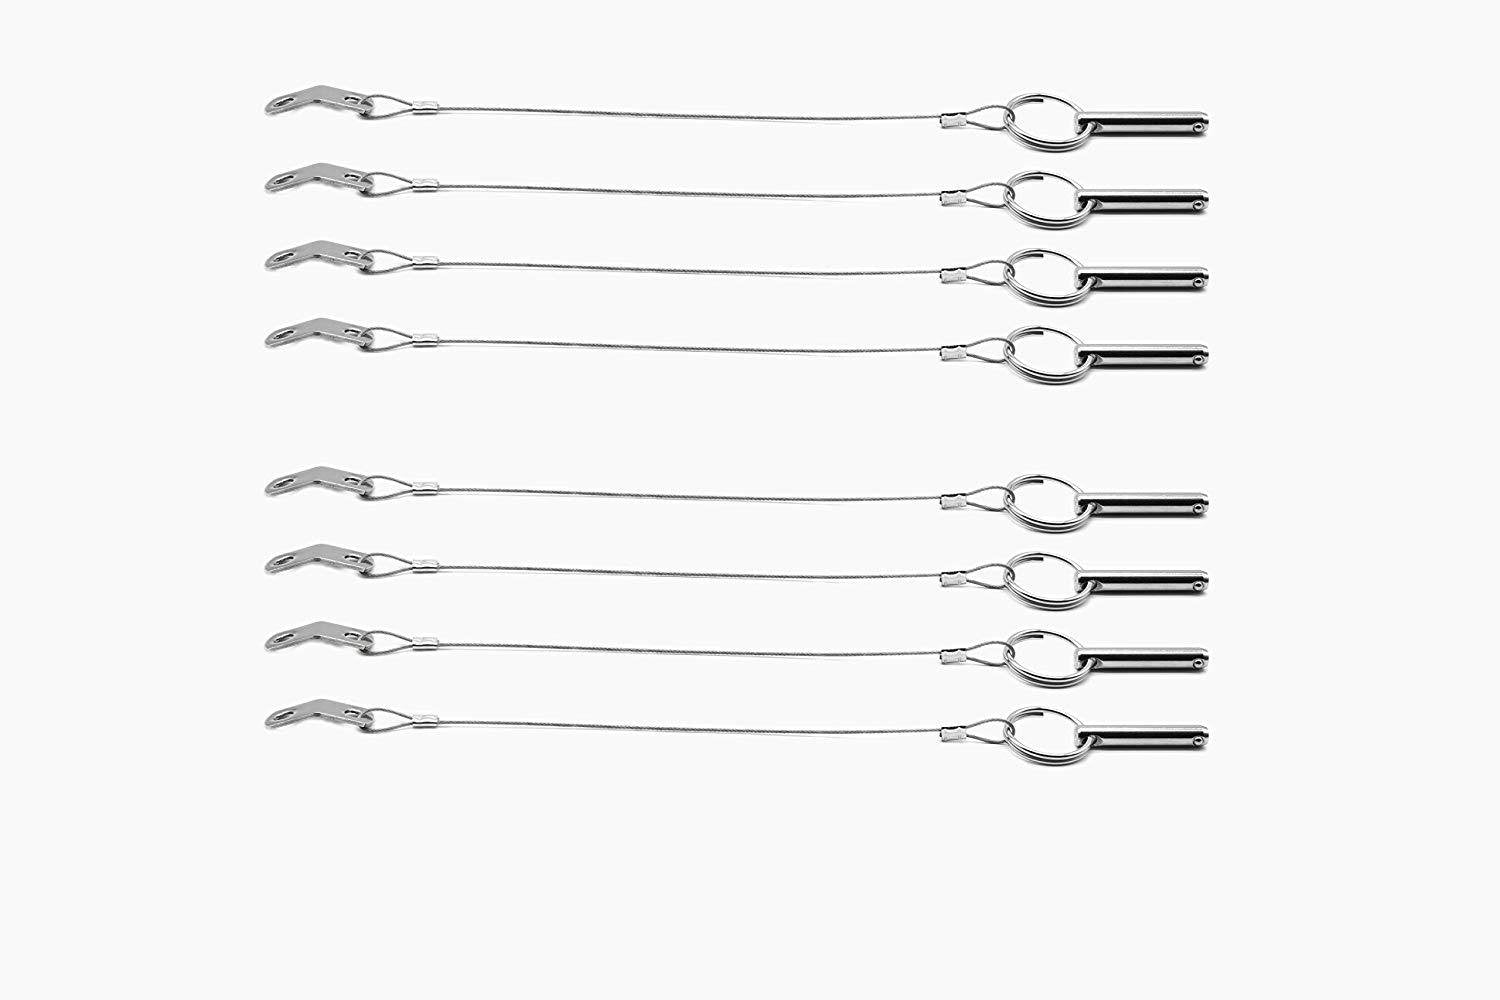 Marine City Stainless-Steel Boat Bimini Top Quick Disconnect Pin with Cable 1/4" x 1" Grip (8pcs)